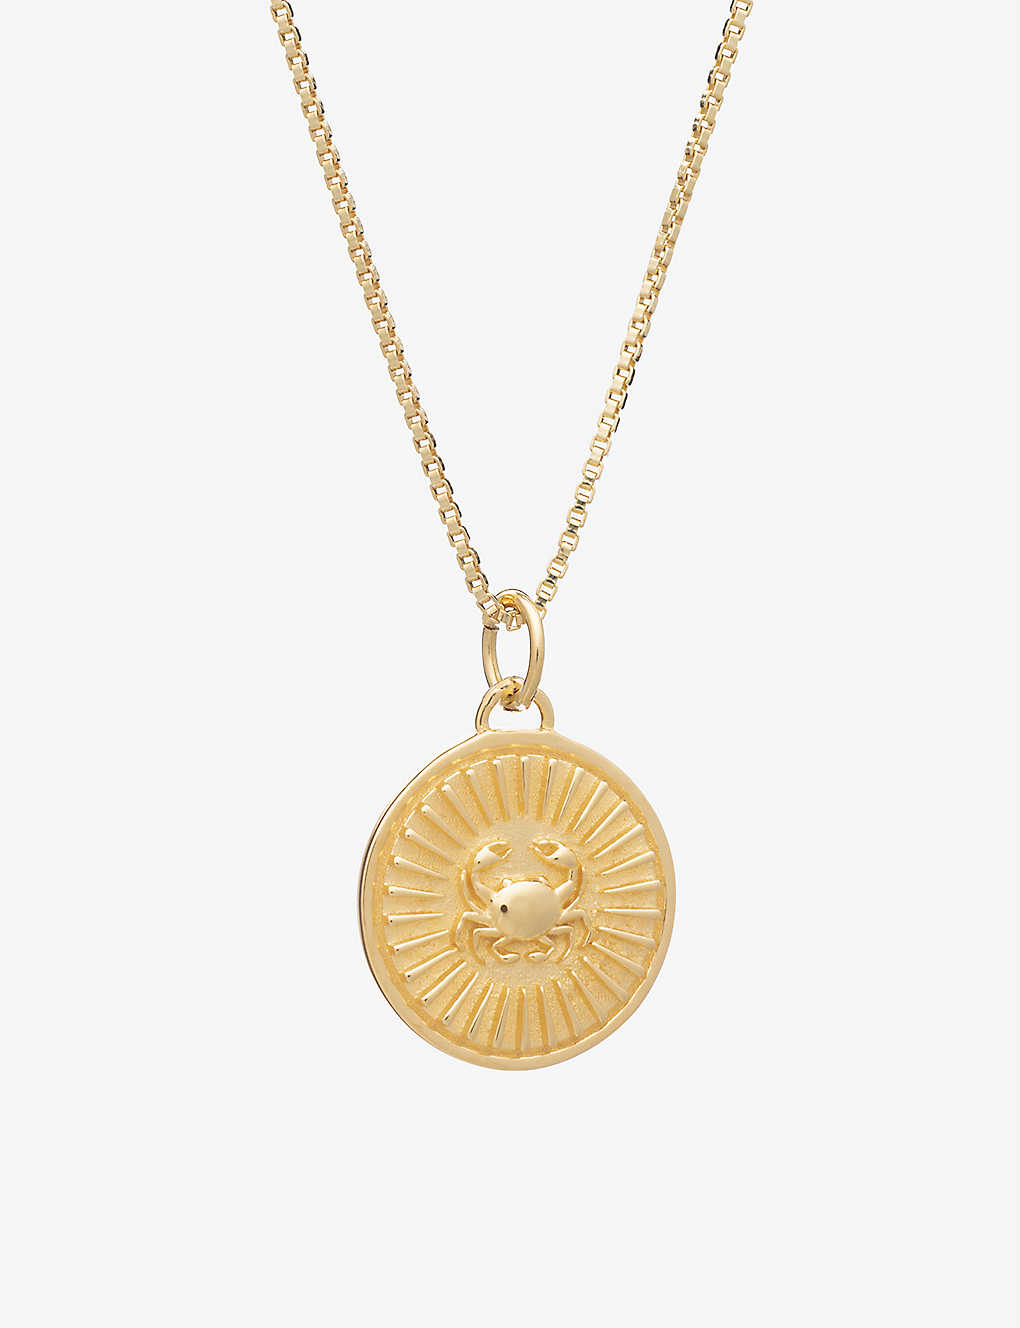 Rachel Jackson Zodiac Coin Cancer Short 22ct Gold-plated Sterling Silver Necklace In 22 Carat Gold Plated